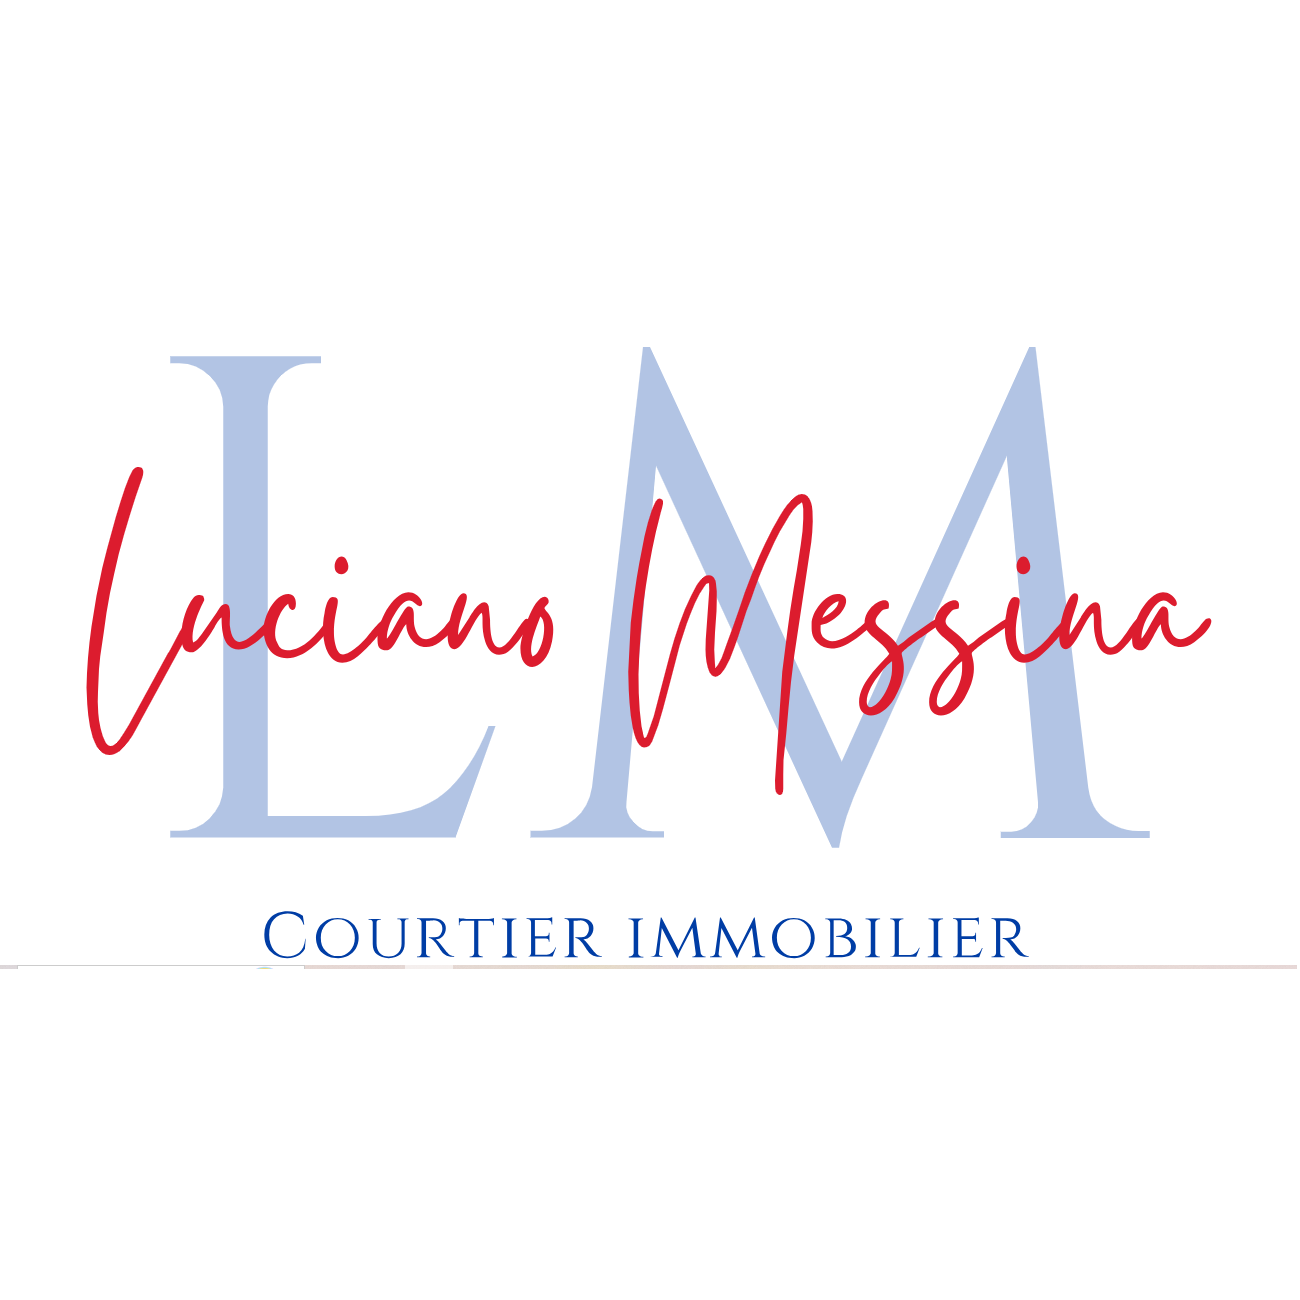 Luciano Messina Courtier